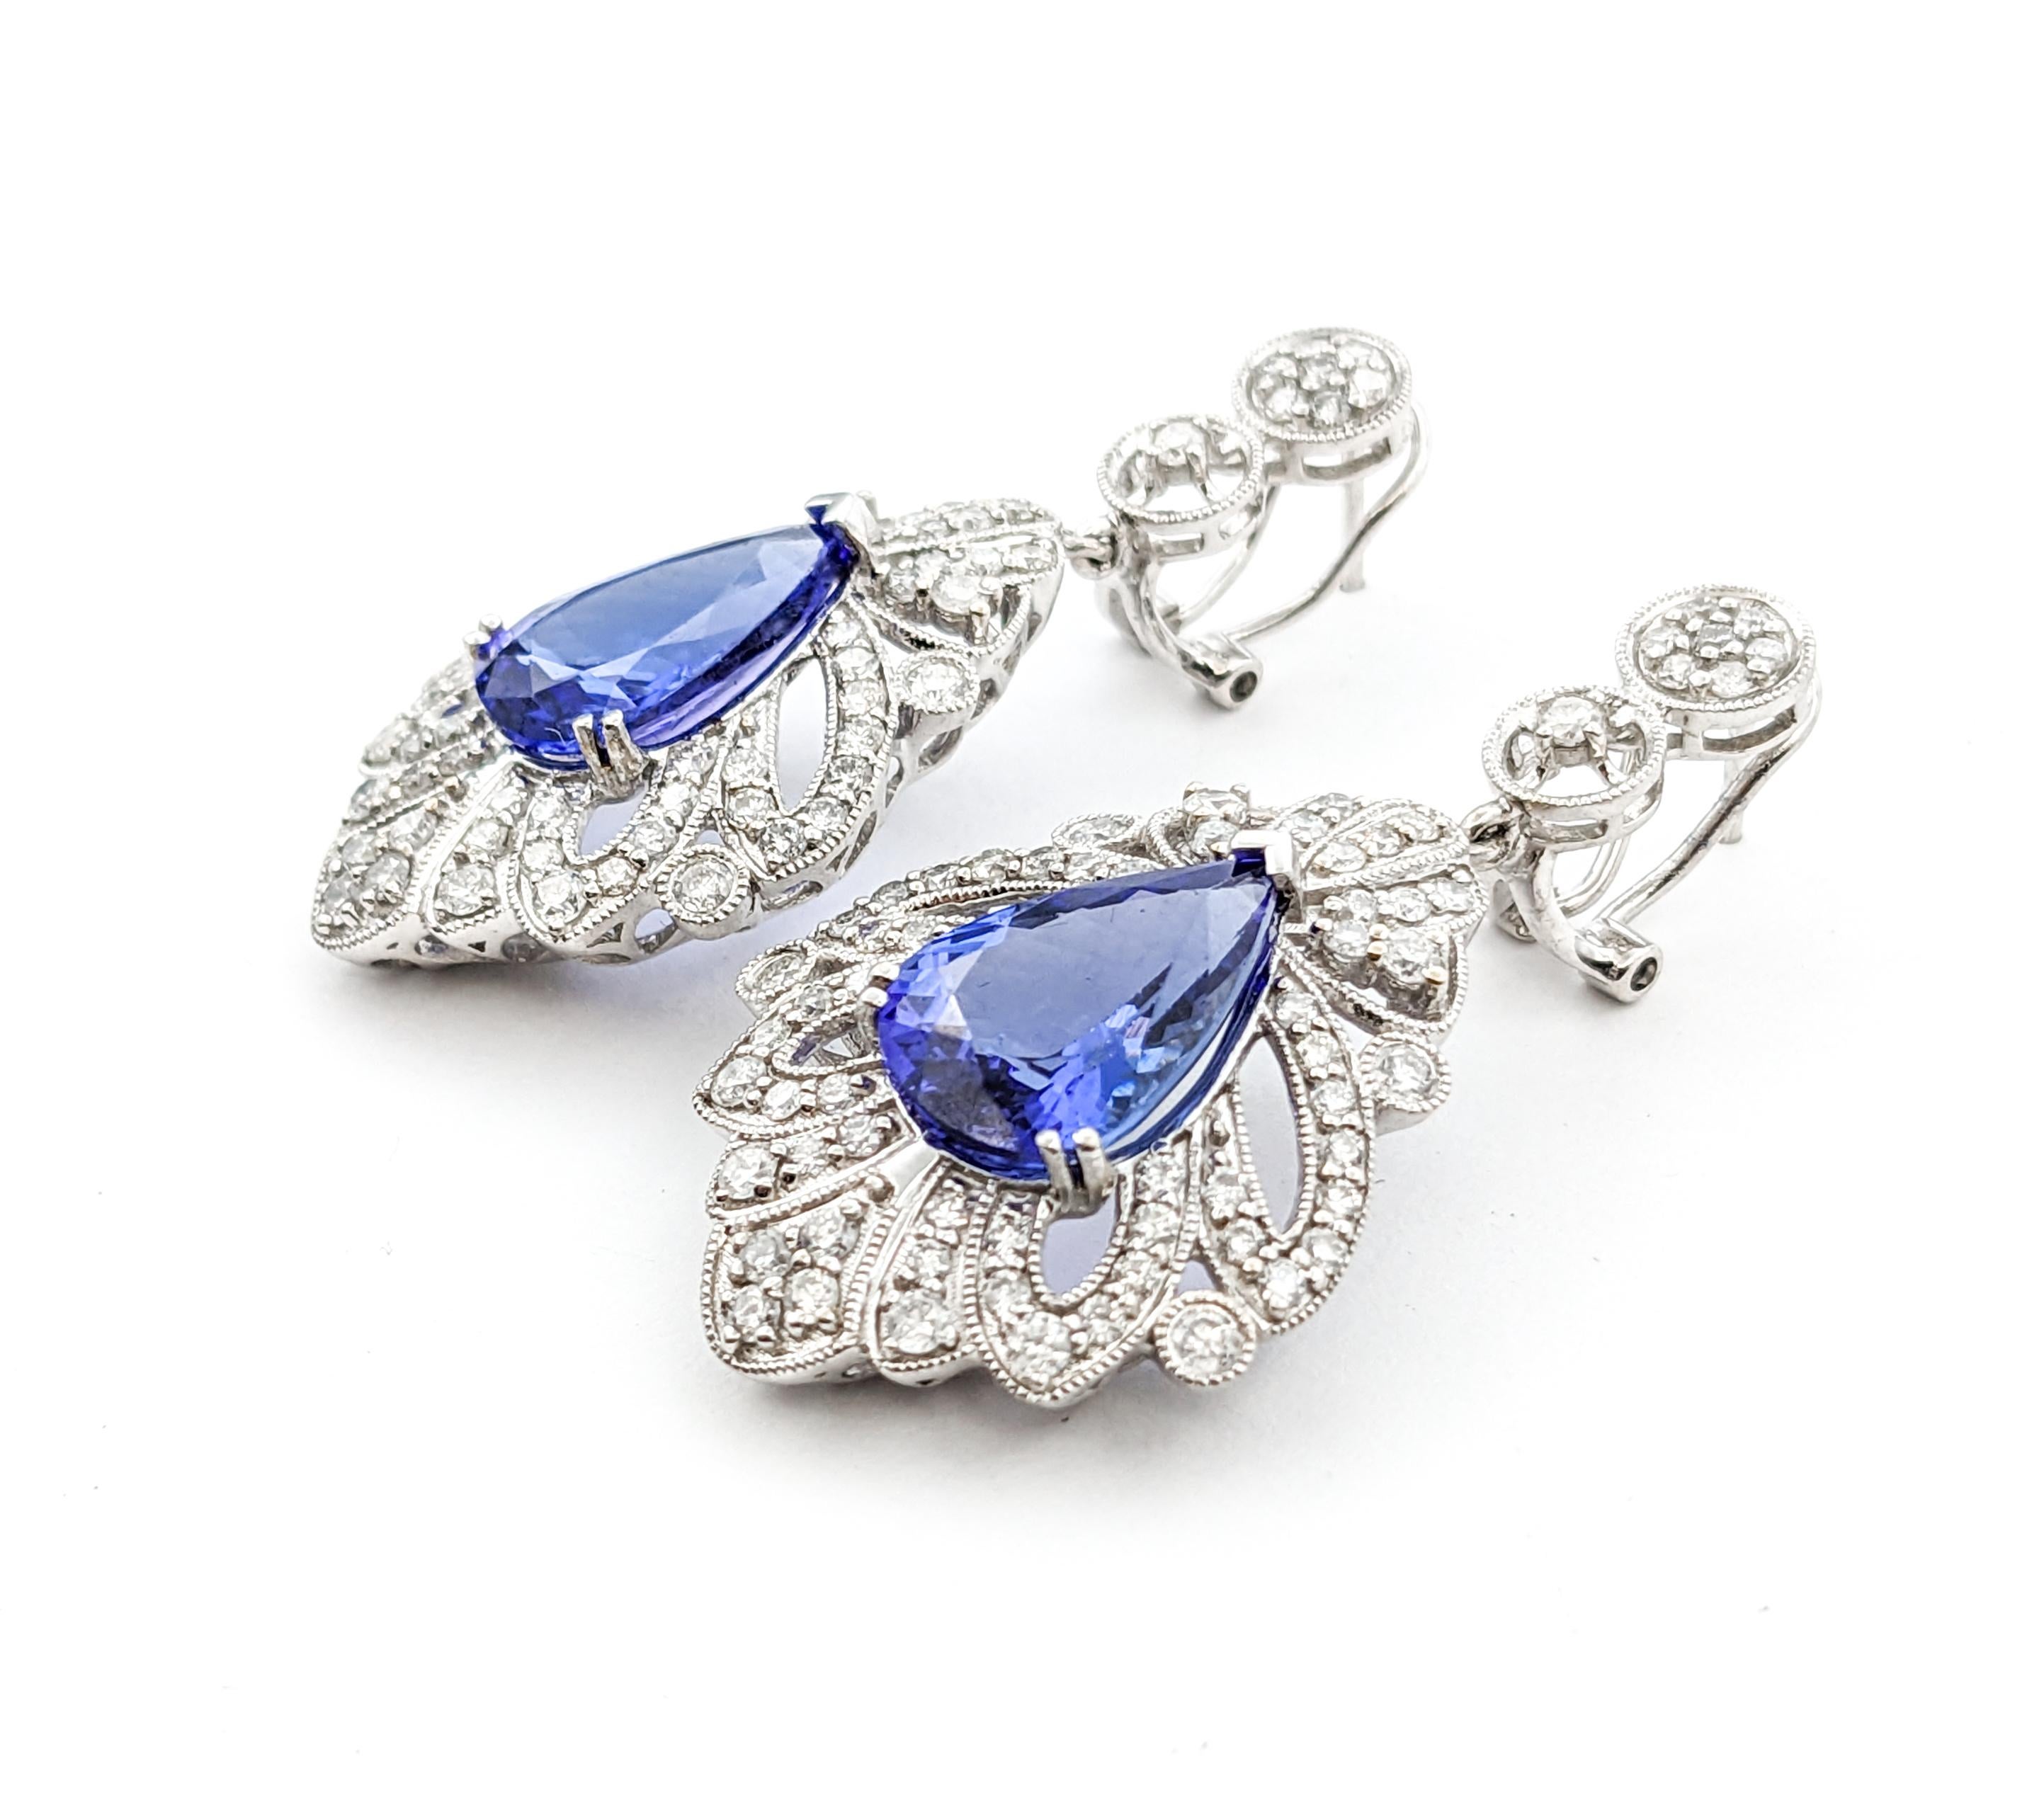 9.17ctw Tanzanite & 2.34ctw Diamond Dangle Earrings In White Gold

Introducing these exquisite Tanzanite Dangle Earrings, crafted in bright 18K White Gold, a true embodiment of elegance and craftsmanship. Enhanced by a generous weight of 9.17 carats